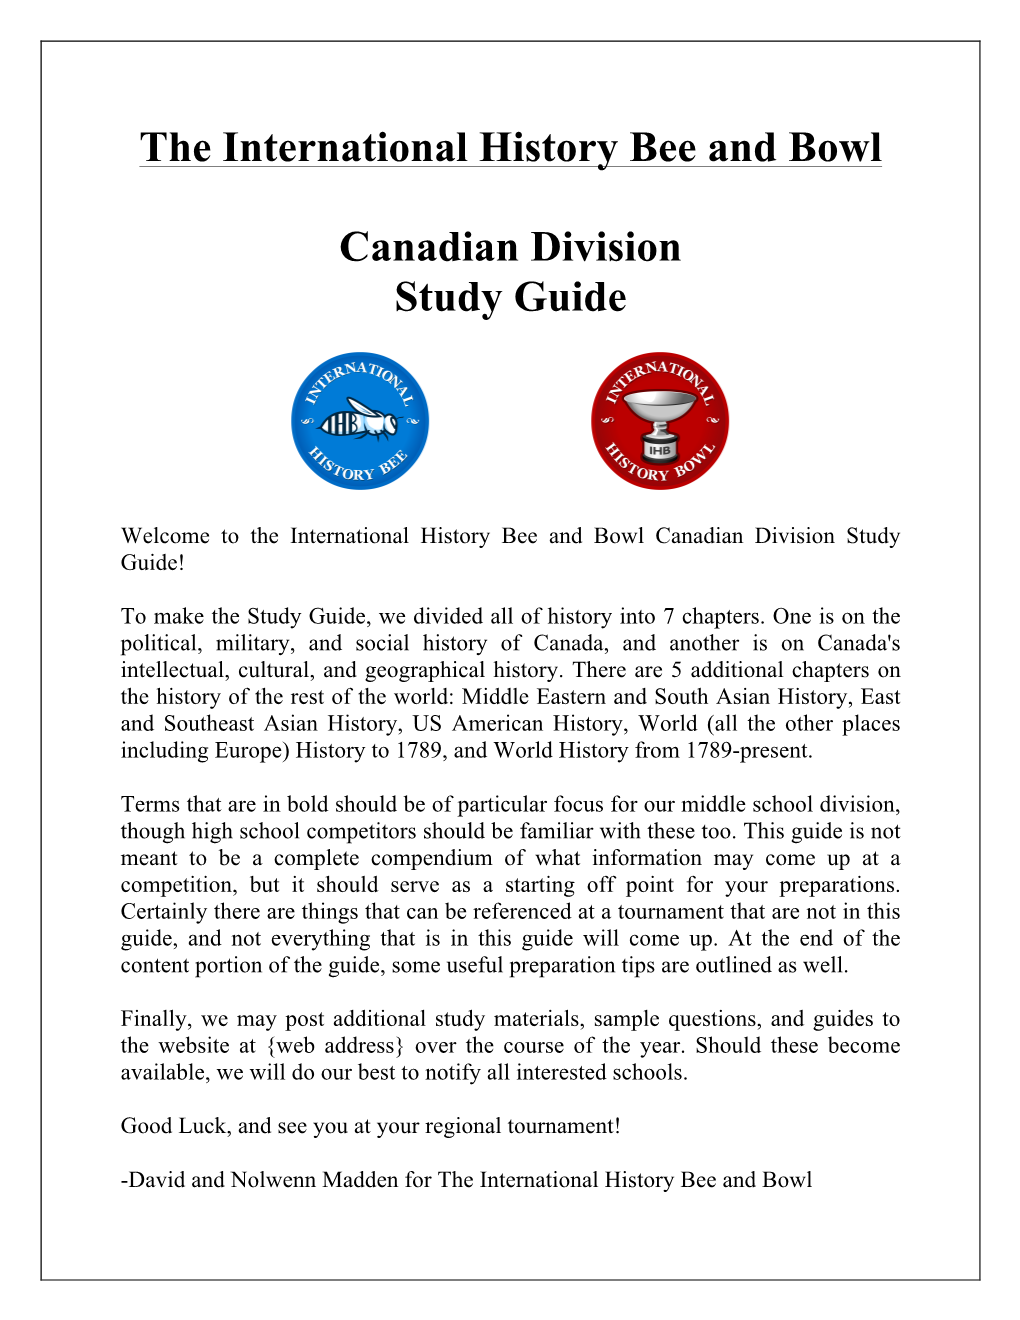 The International History Bee and Bowl Canadian Division Study Guide!